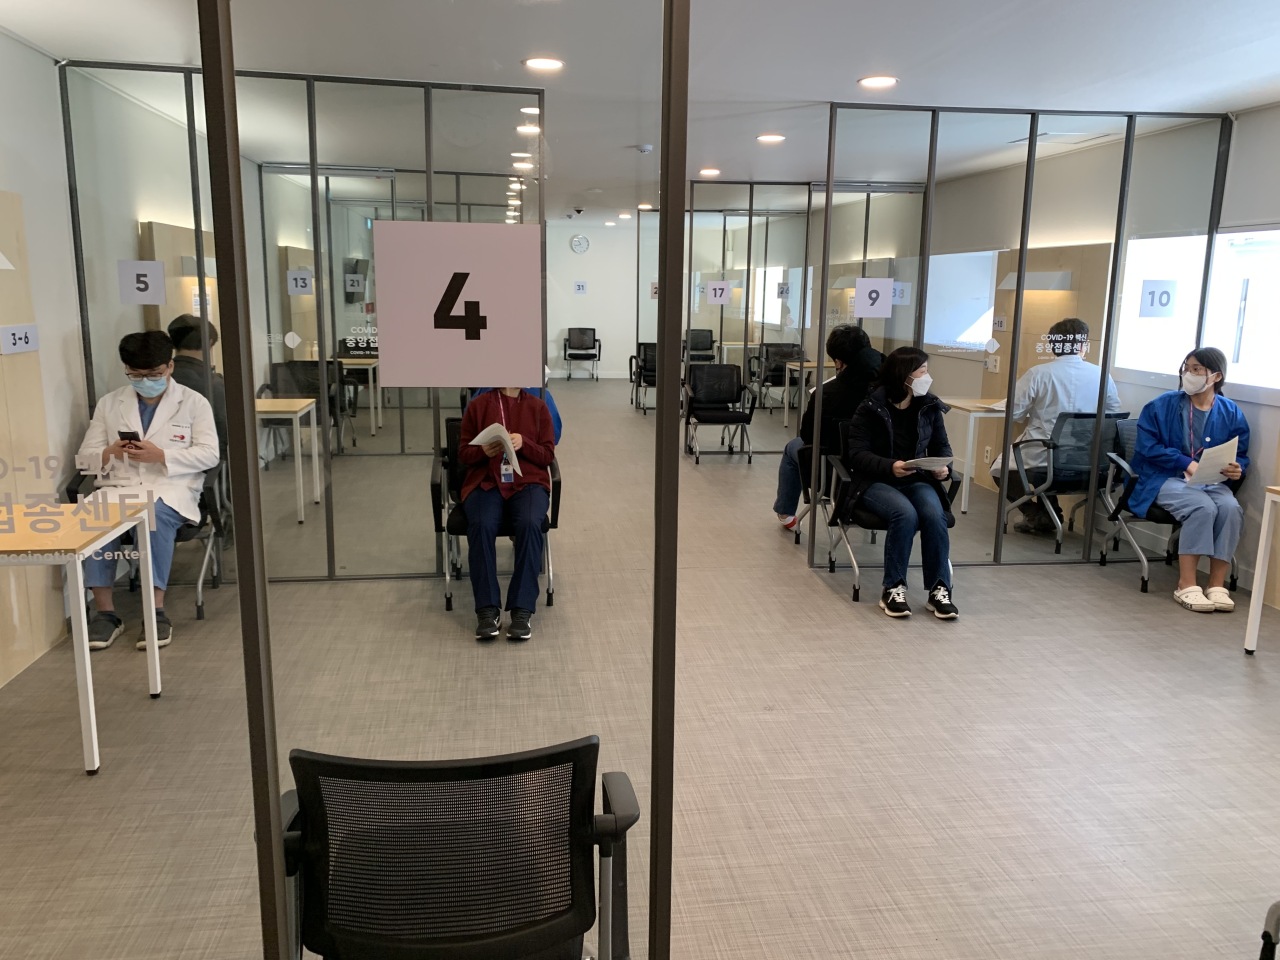 Newly vaccinated health care workers are seated in the observation room as they are monitored for possible side effects. (Kim Arin/The Korea Herald)